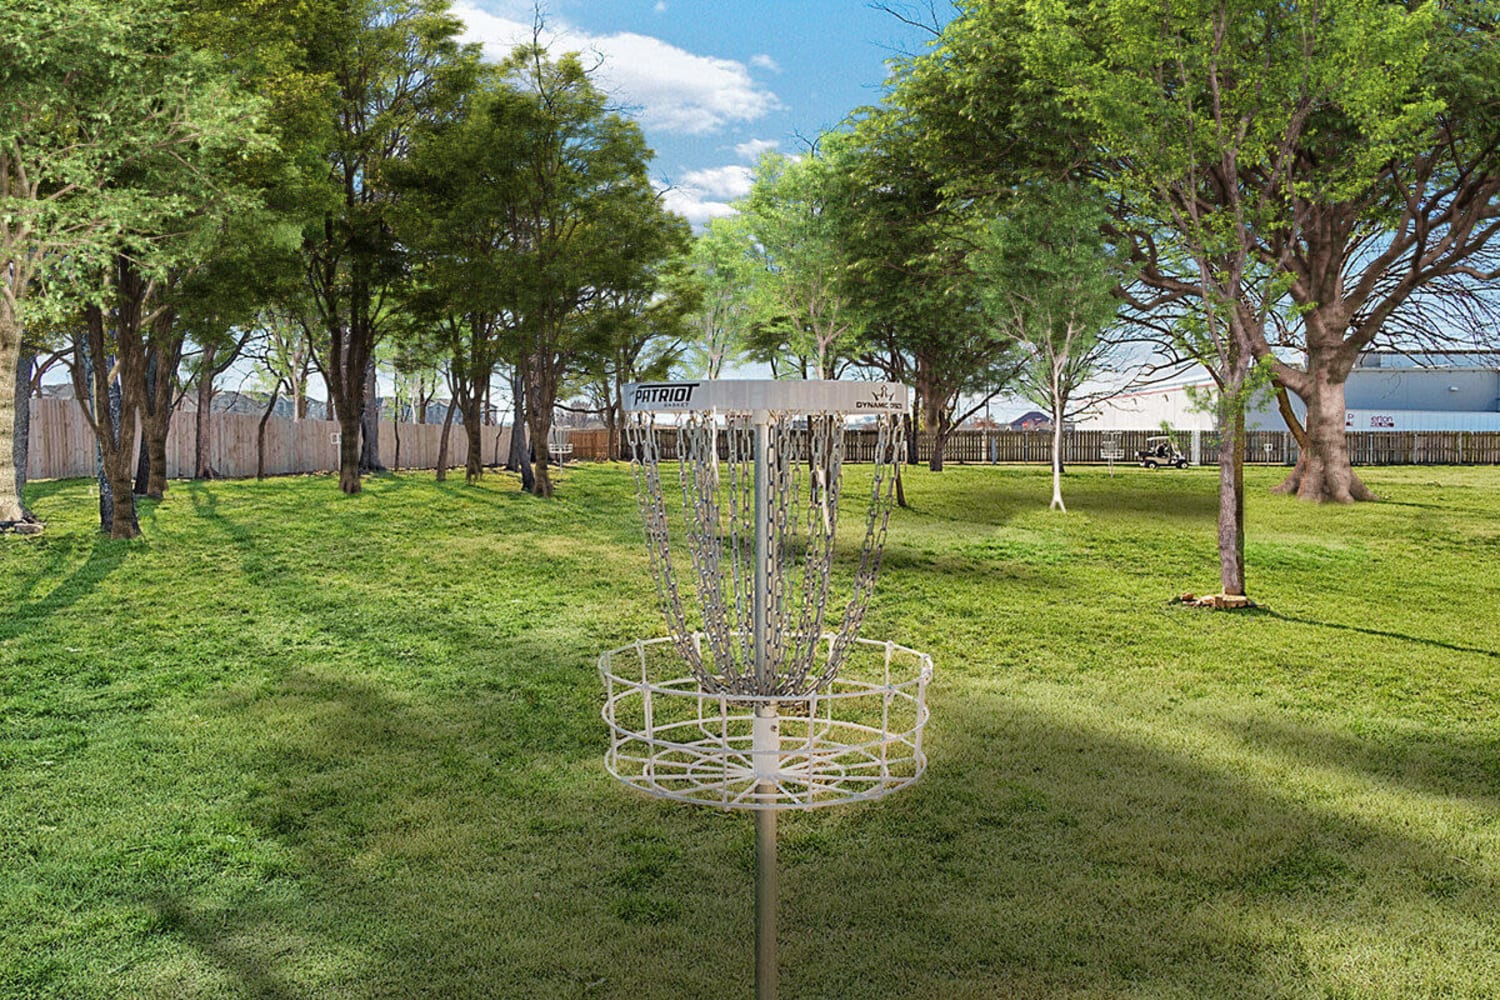 Practice your putting on our disc golf baskets at Palisades at Pleasant Crossing in Rogers, Arkansas